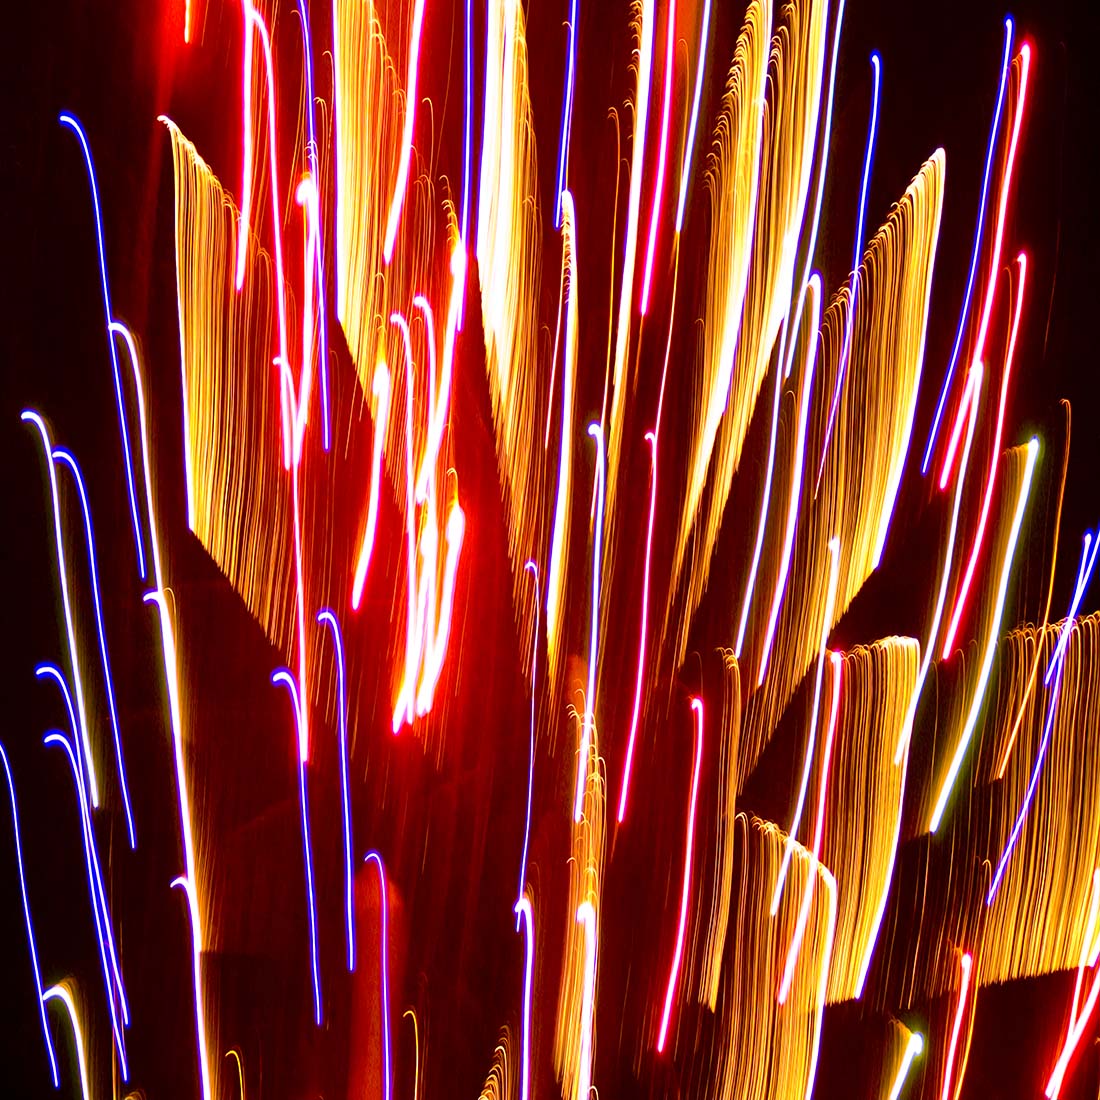 Abstract Fireworks photograph by Doug LaRue